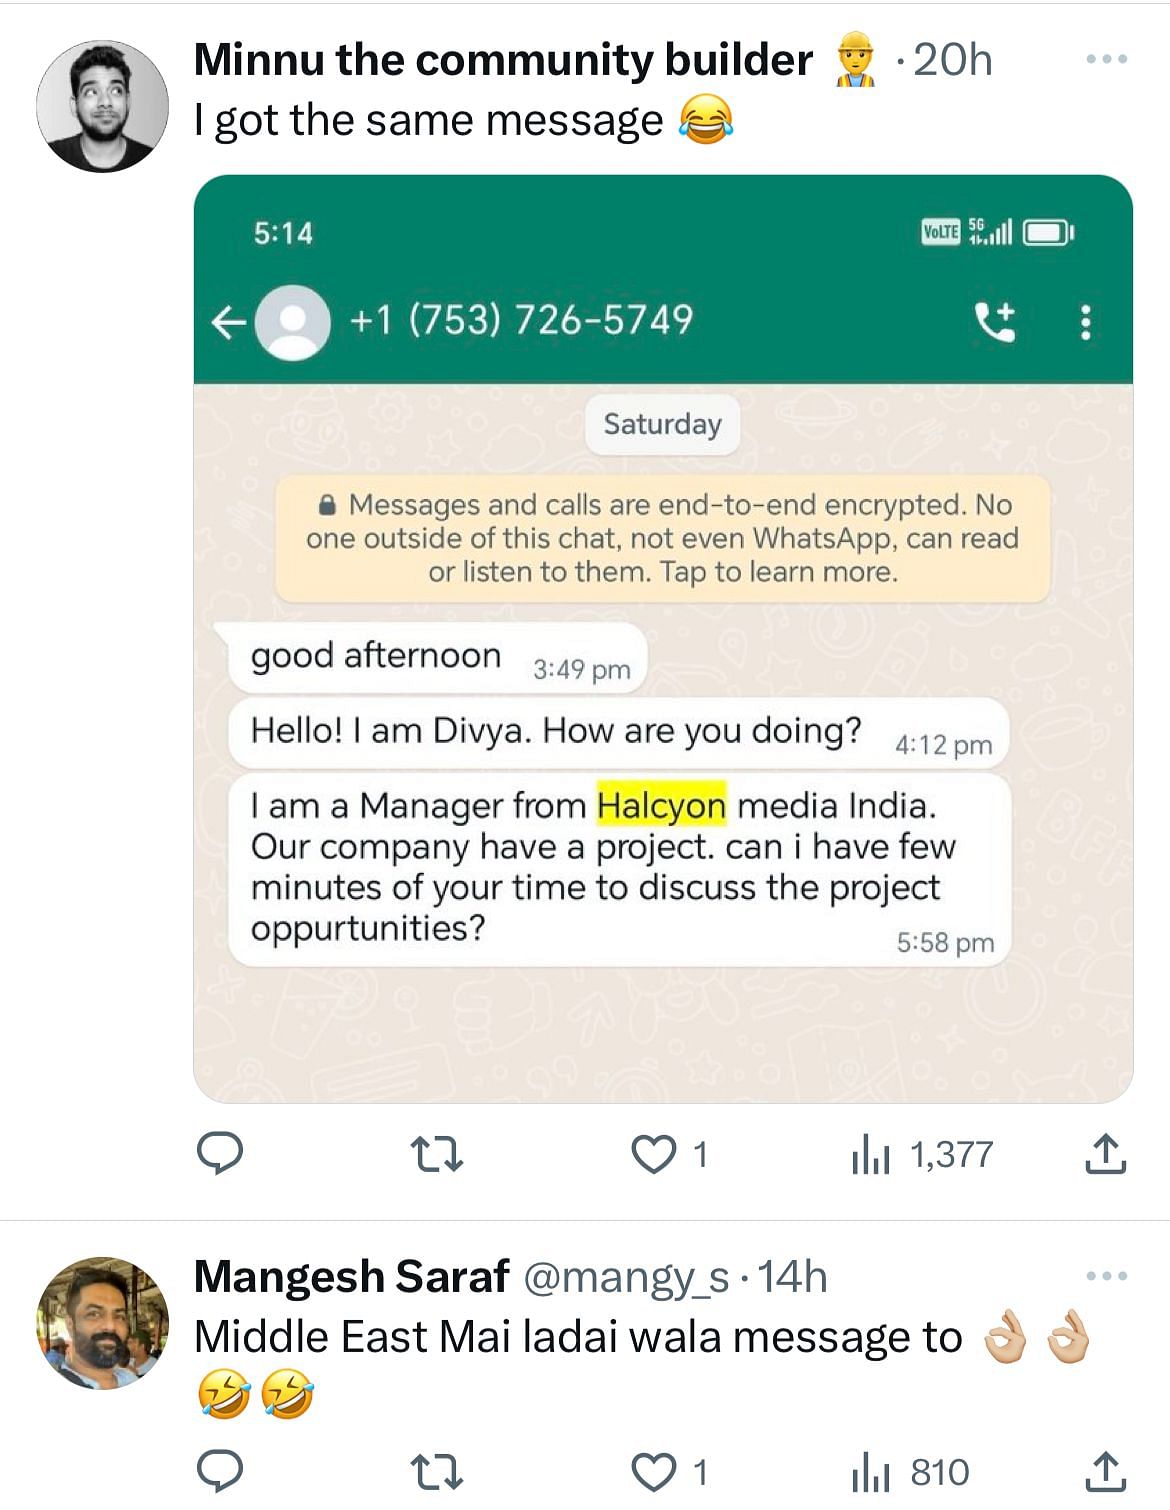 Chetty Arun playfully engaged with a WhatsApp scammer, turning the tables on them in a hilarious exchange.